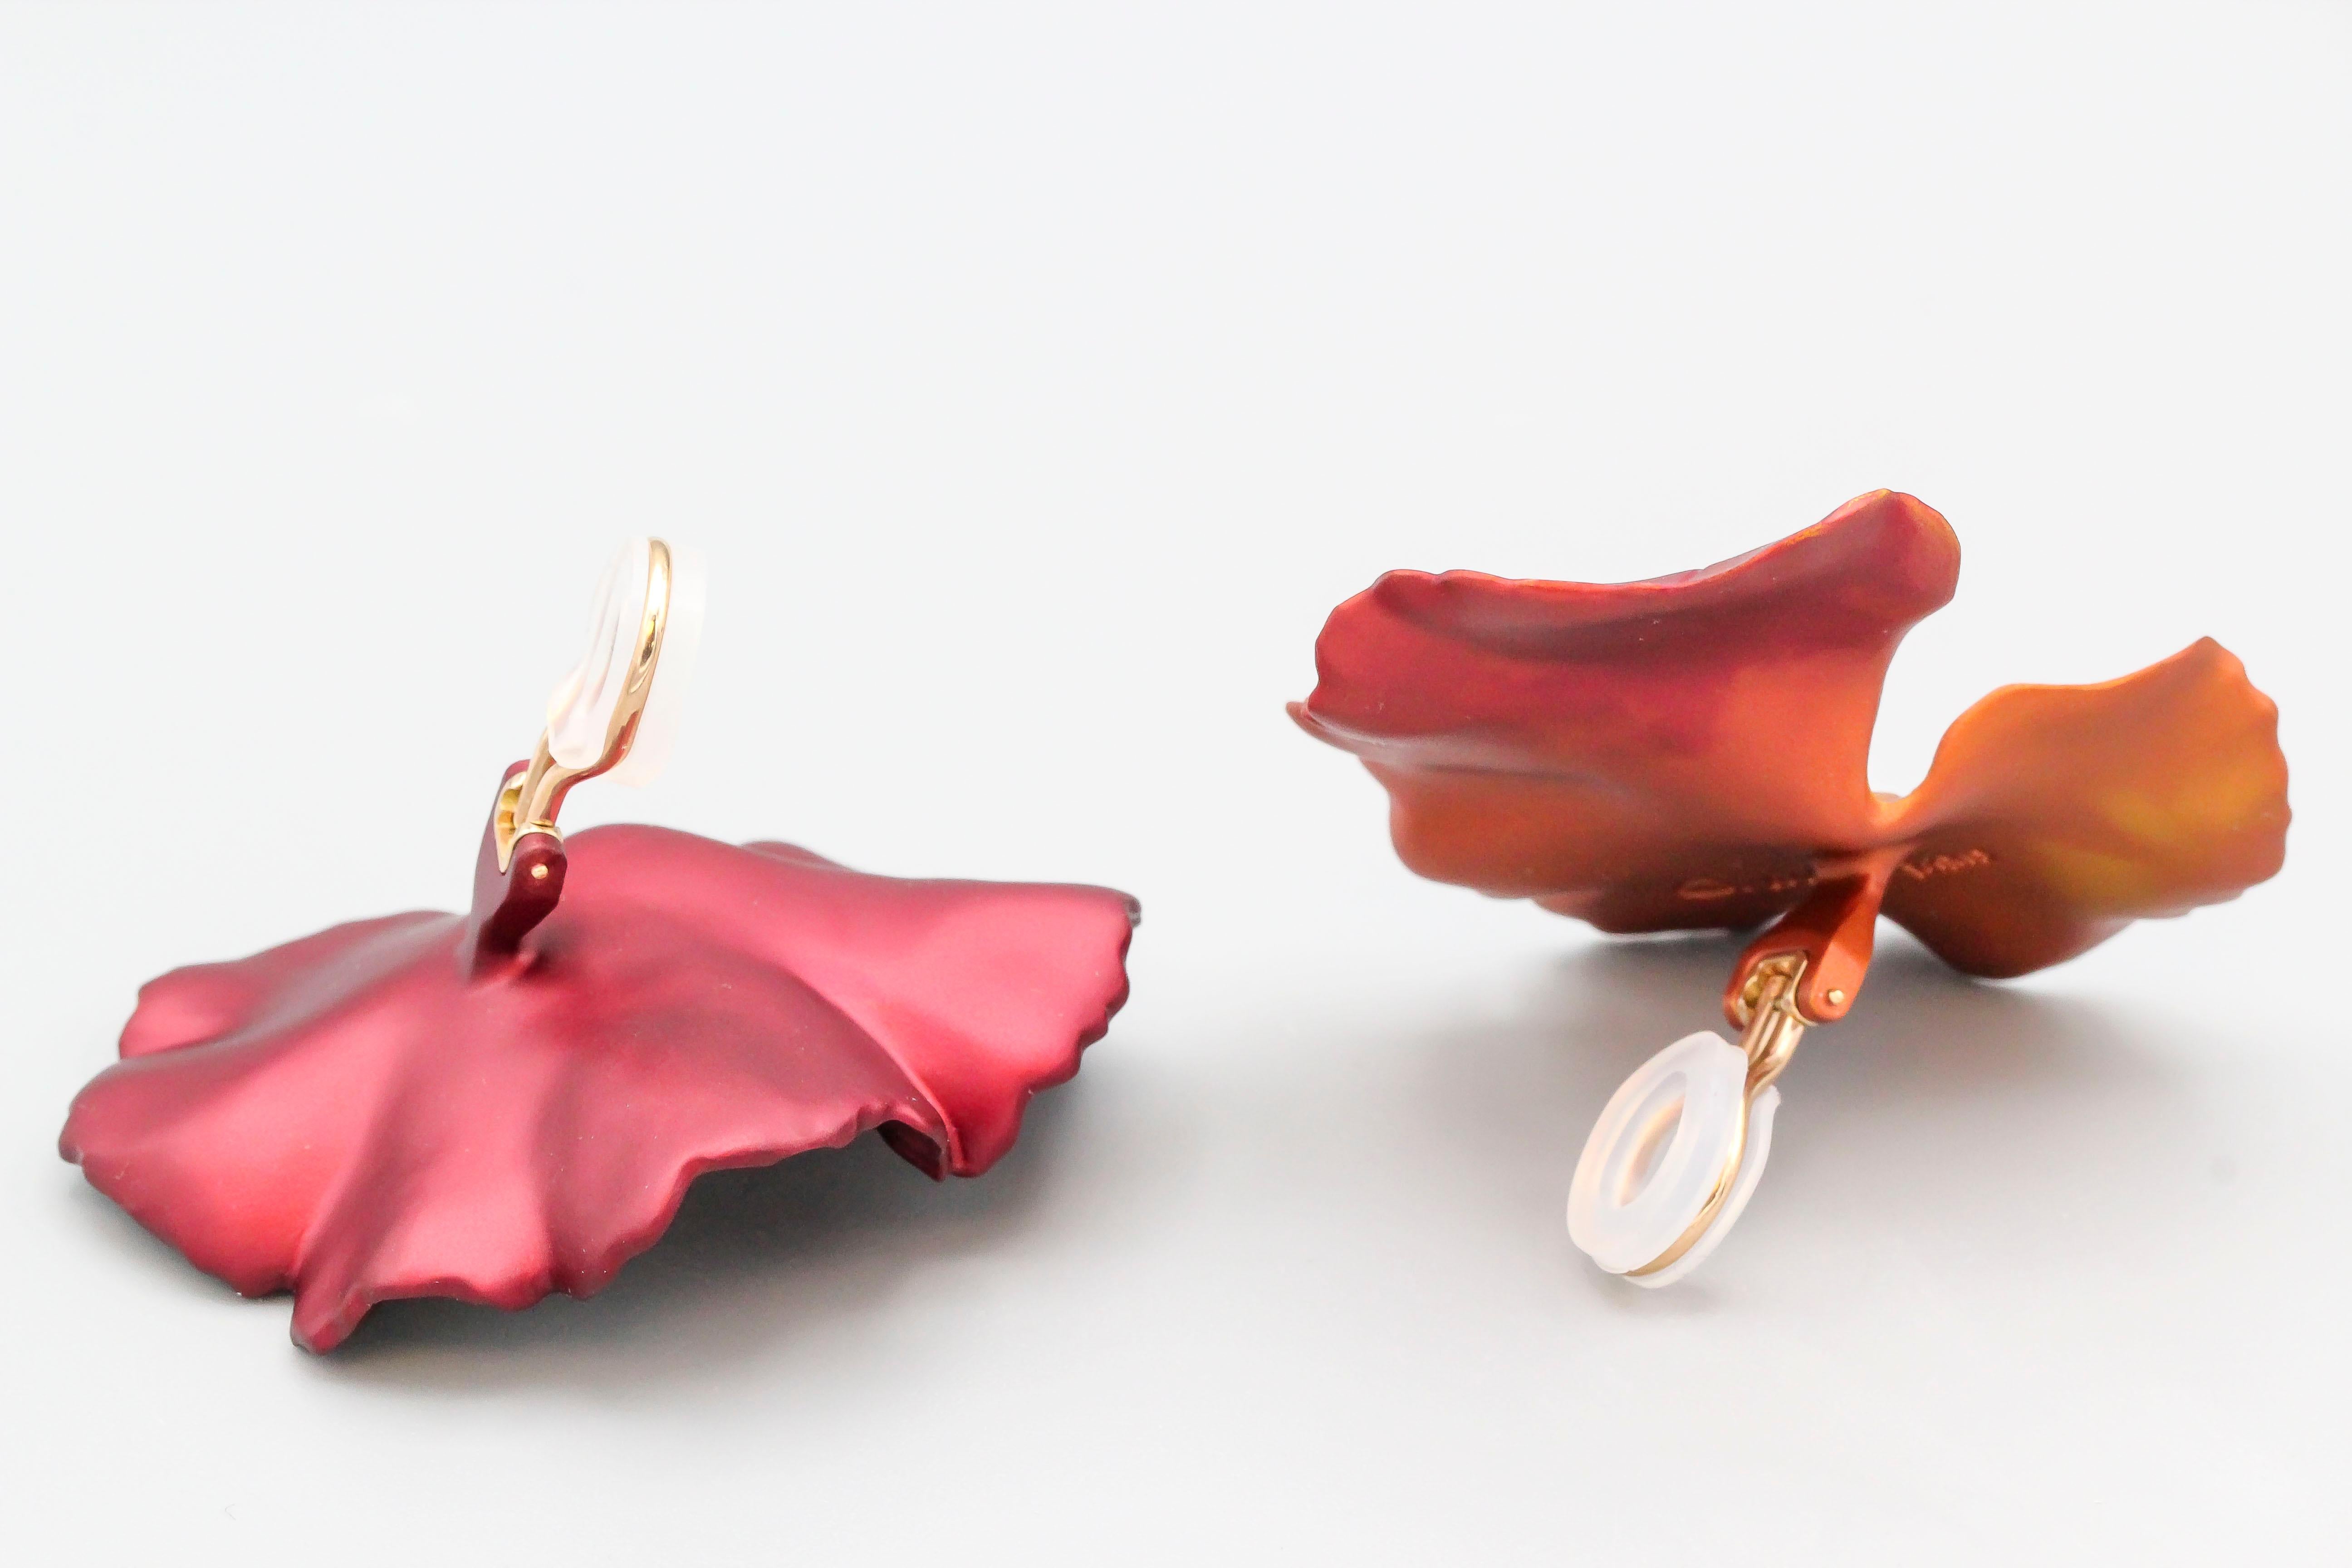 Very fine and scarce aluminum geranium earrings by JAR, Joel Arthur Rosenthal. Beautifully designed to remind one of the changing colors of foliage in the fall.  These are the large model and are made in limited edition. Pouch is included in sale.